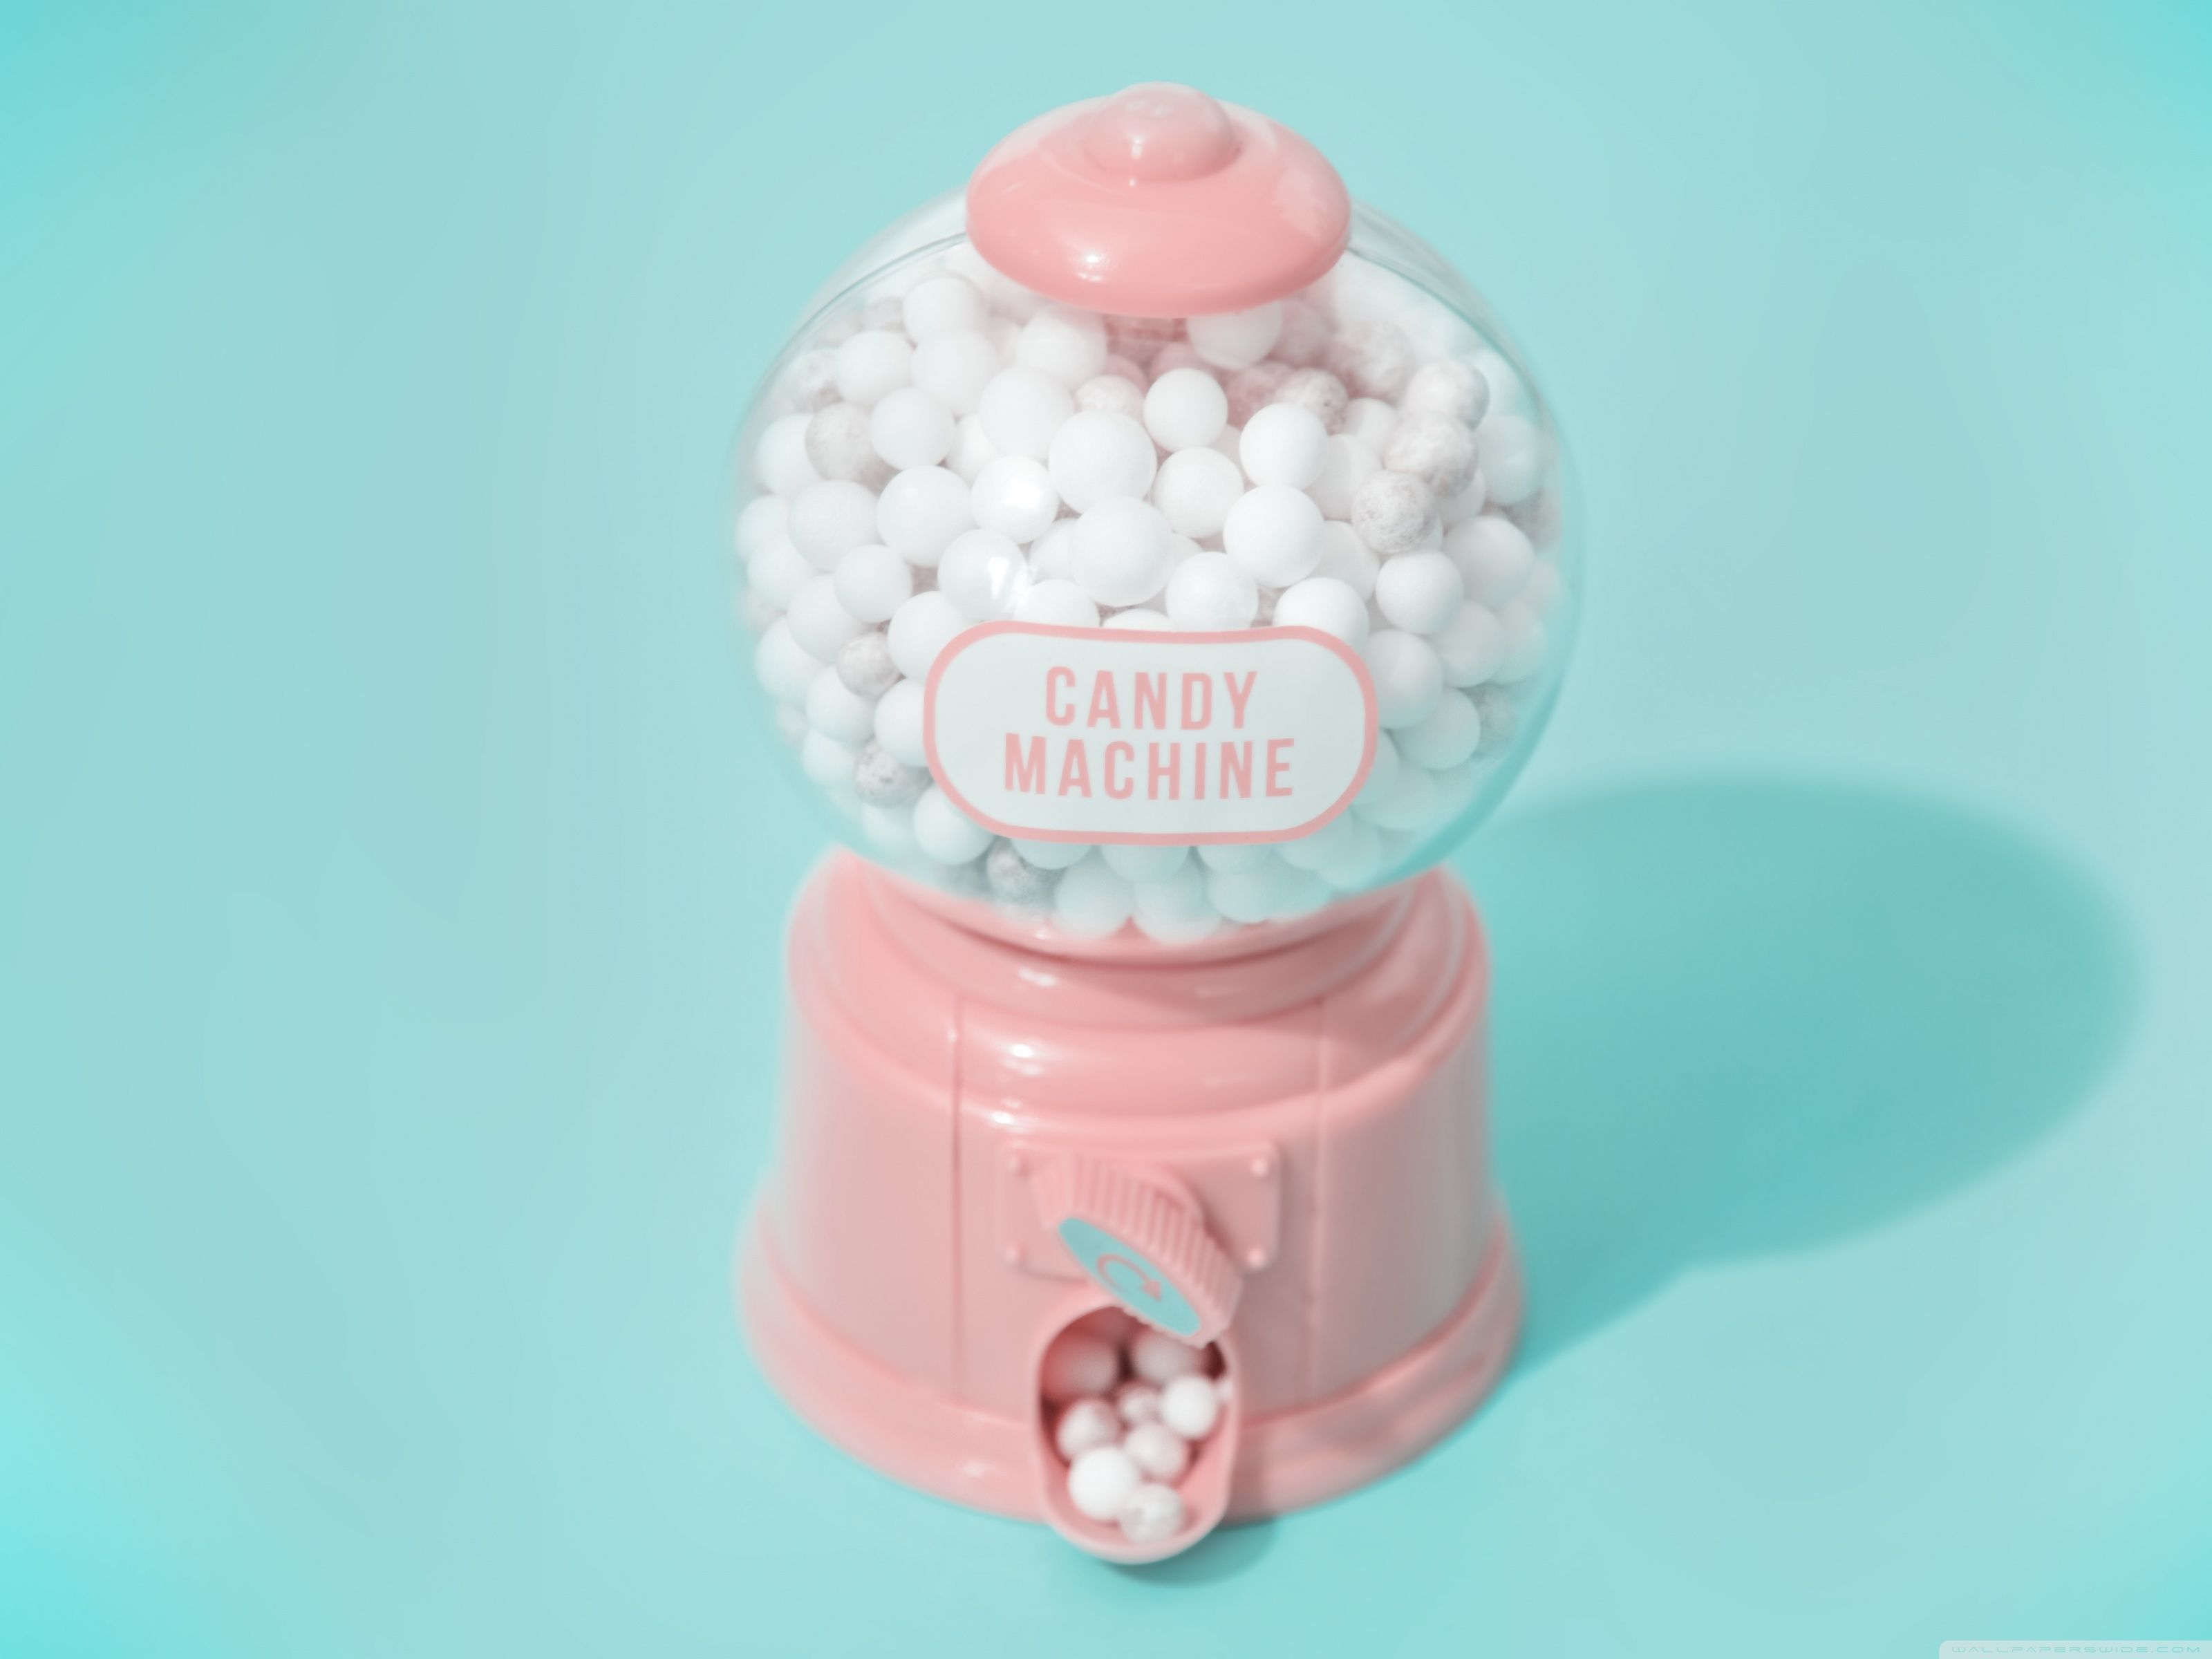 A pink candy machine with white balls inside - Marshmallows